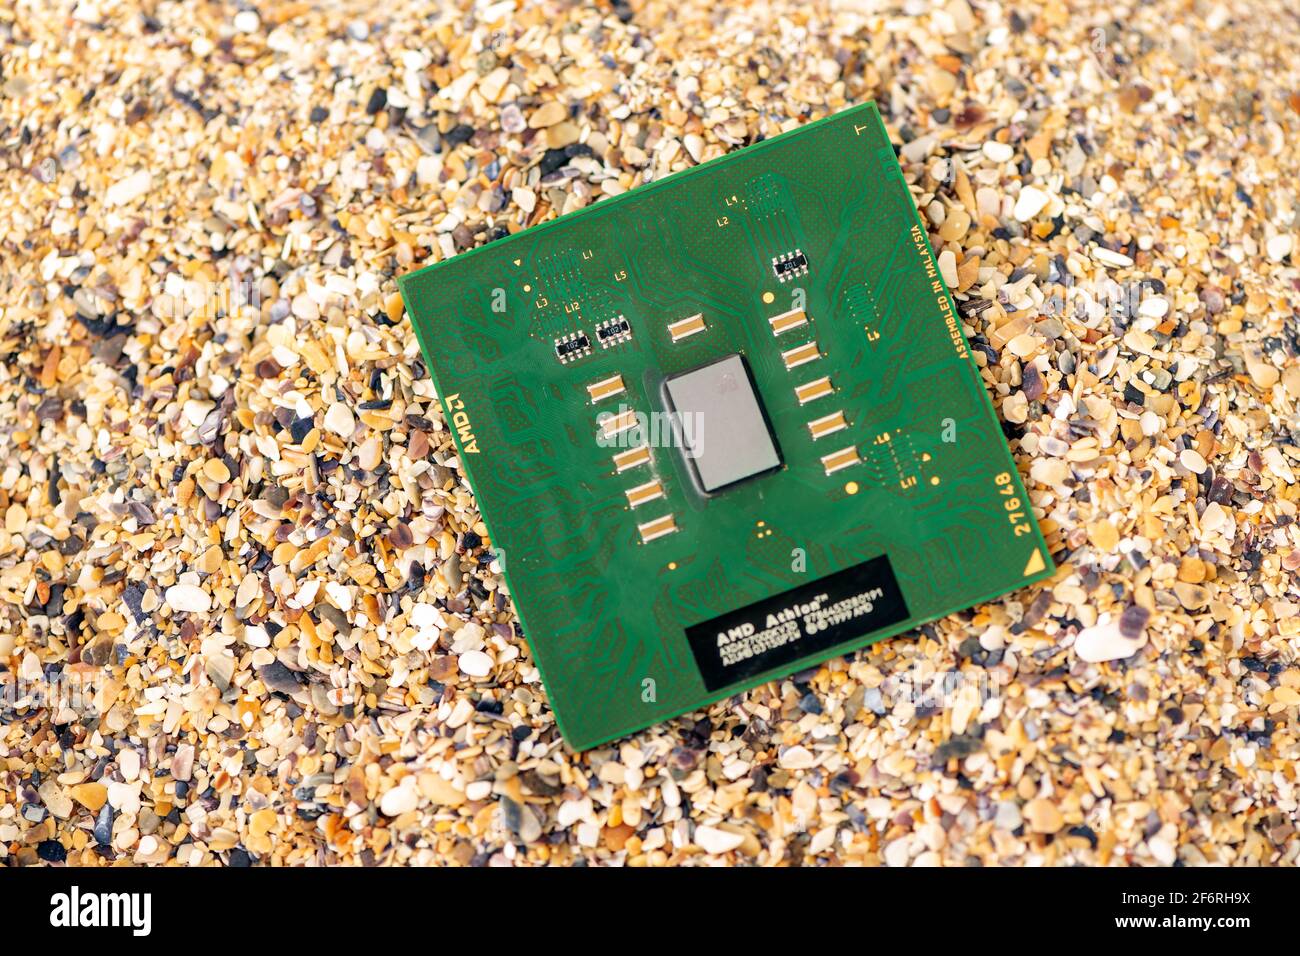 Timisoara, Romania - October 18, 2020: Close-up of an AMD Athlon 2700+ AXDA2700DKV3D processor, 2700 MHz, socket A with sand in the background. Stock Photo